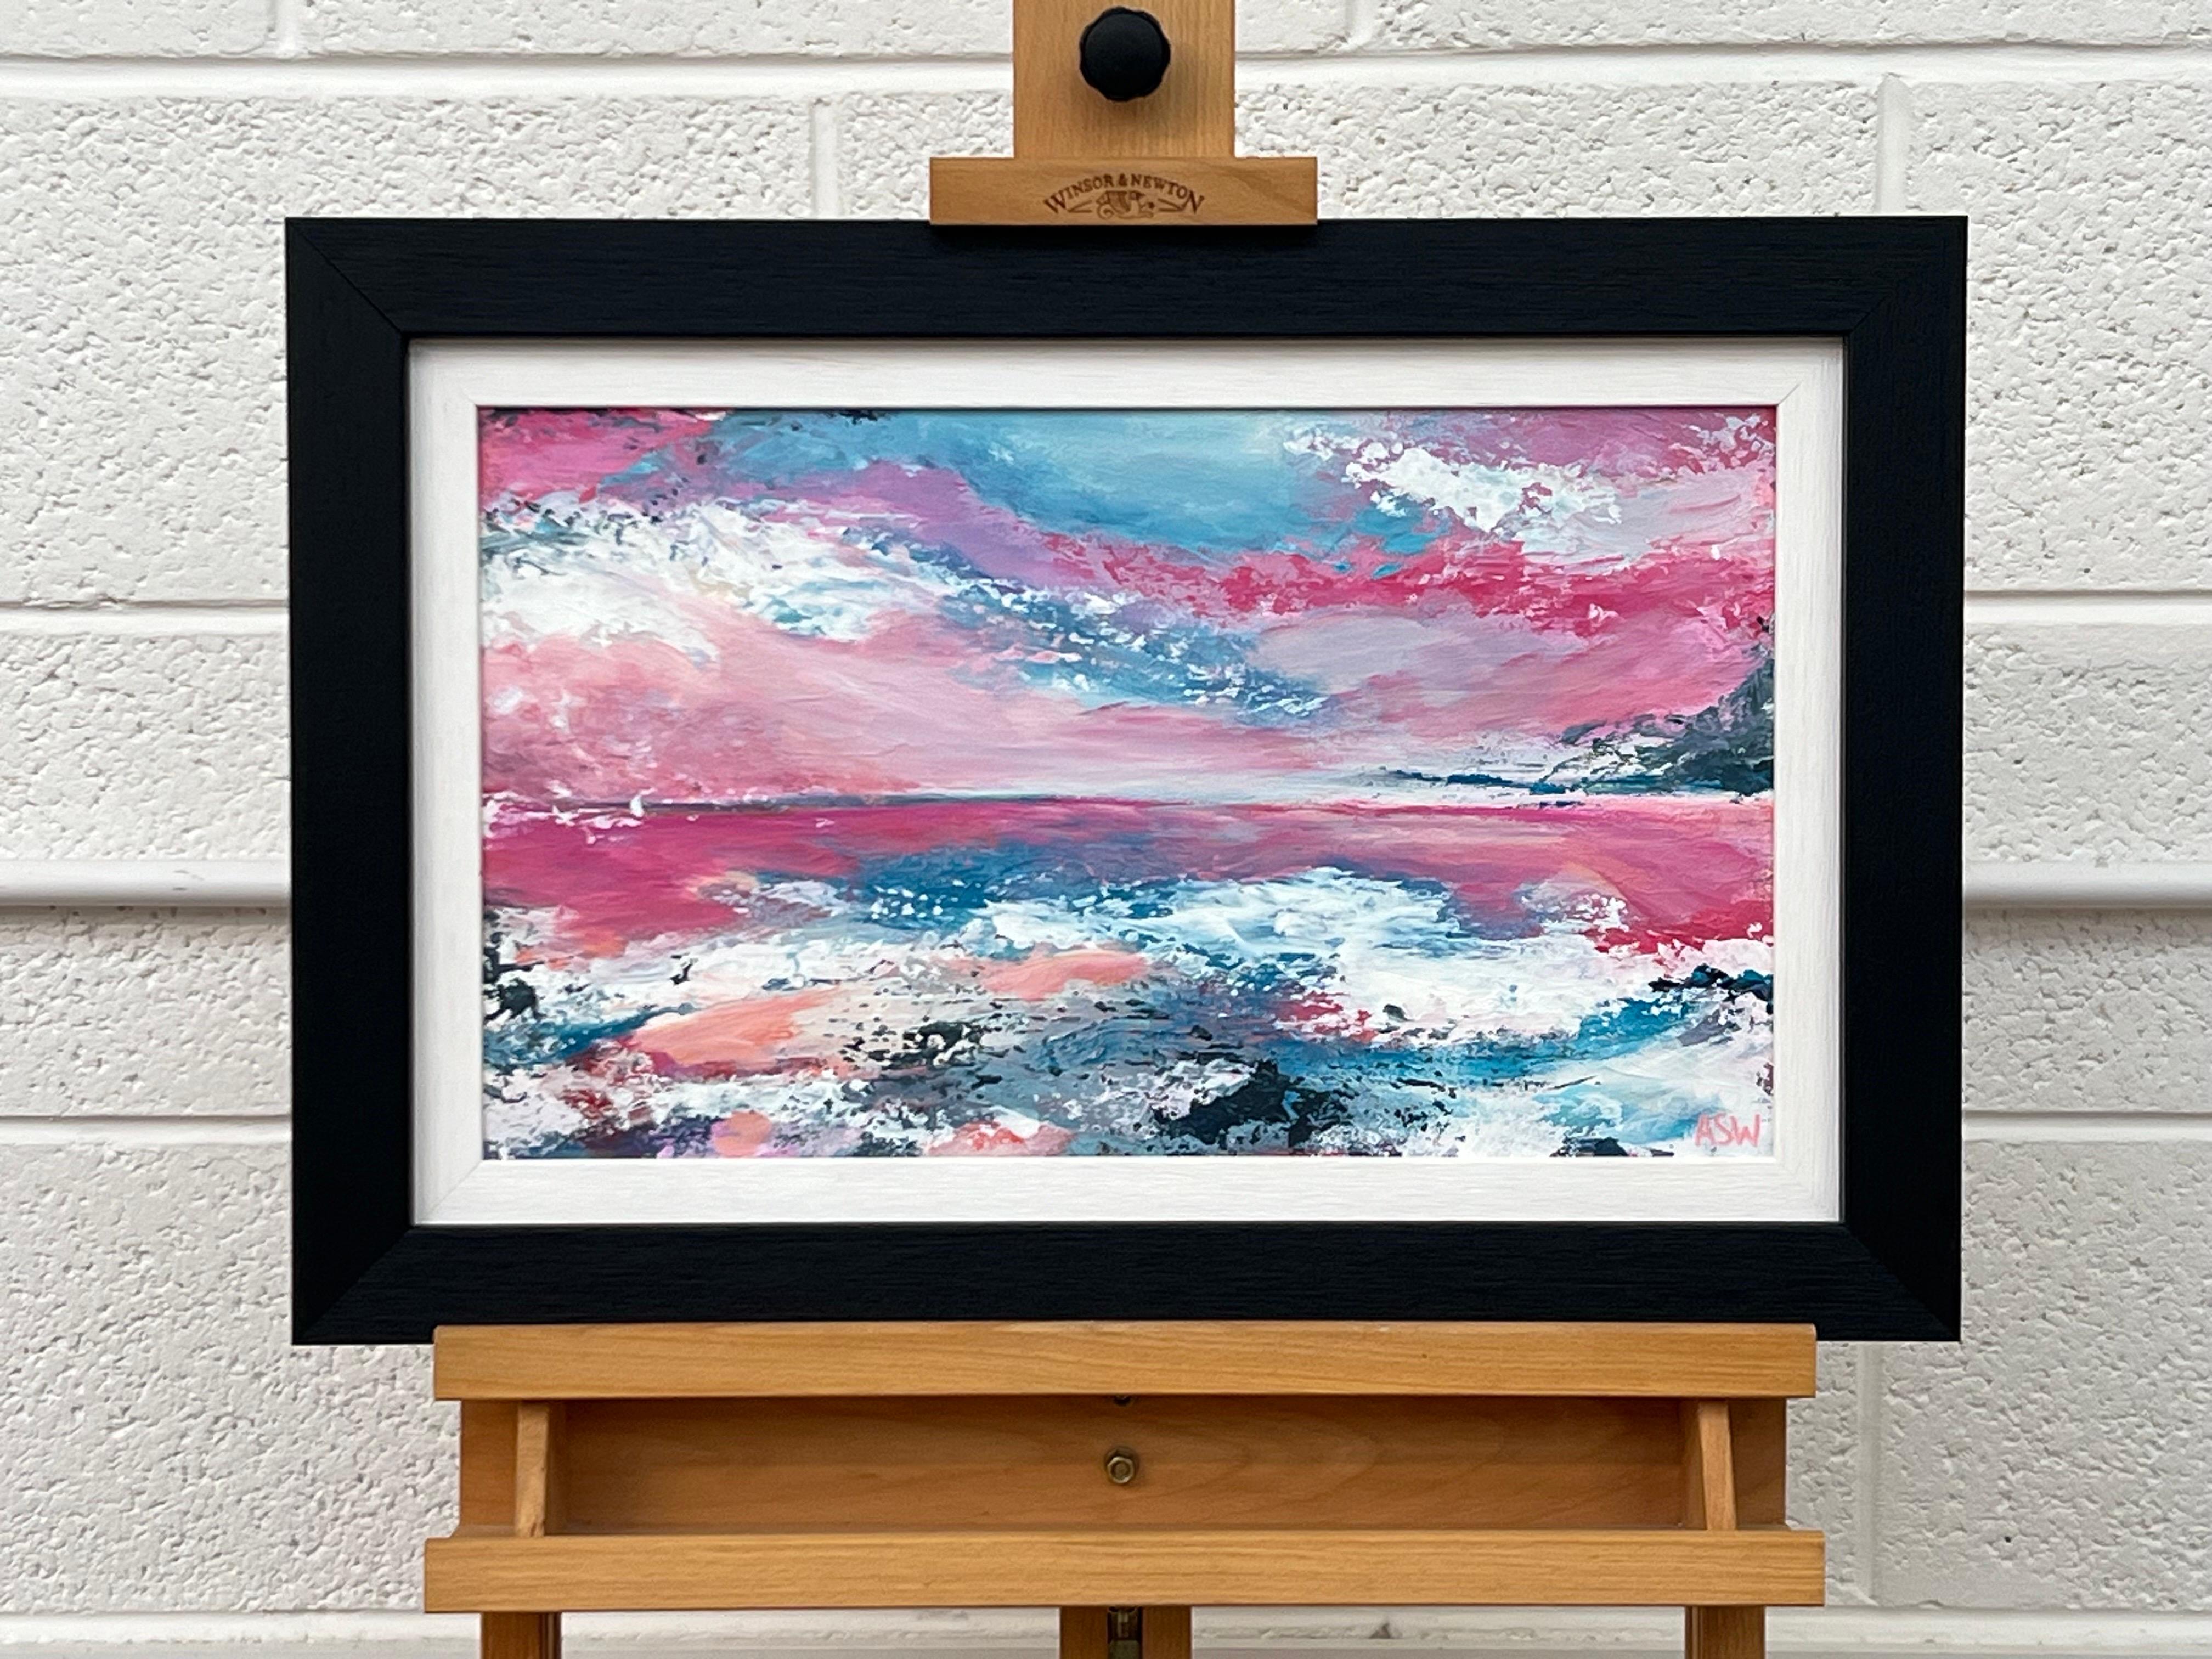 Abstract Landscape Seascape Painting with Pink & Blue Sky by British Artist For Sale 1